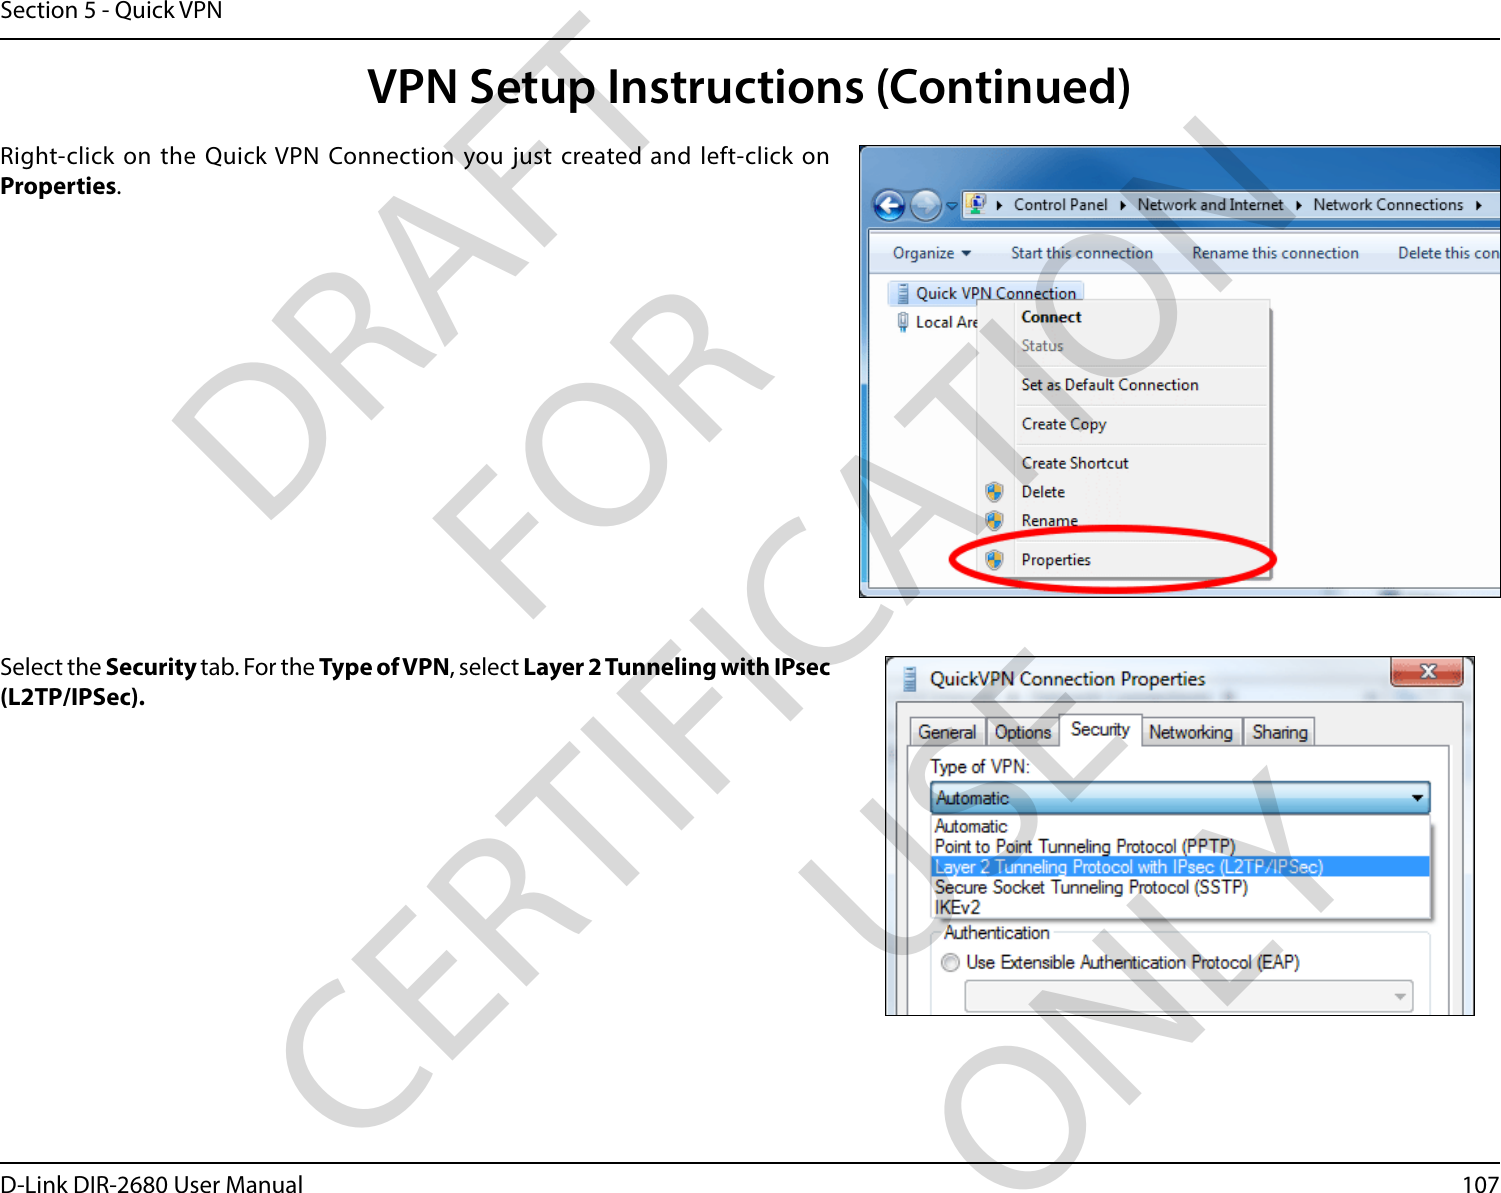 107D-Link DIR-2680 User ManualSection 5 - Quick VPNSelect the Security tab. For the Type of VPN, select Layer2Tunneling with IPsec (L2TP/IPSec). Right-click on the Quick VPN Connection you just created and left-click on Properties.VPN Setup Instructions (Continued)DRAFT FOR CERTIFICATION USE ONLY